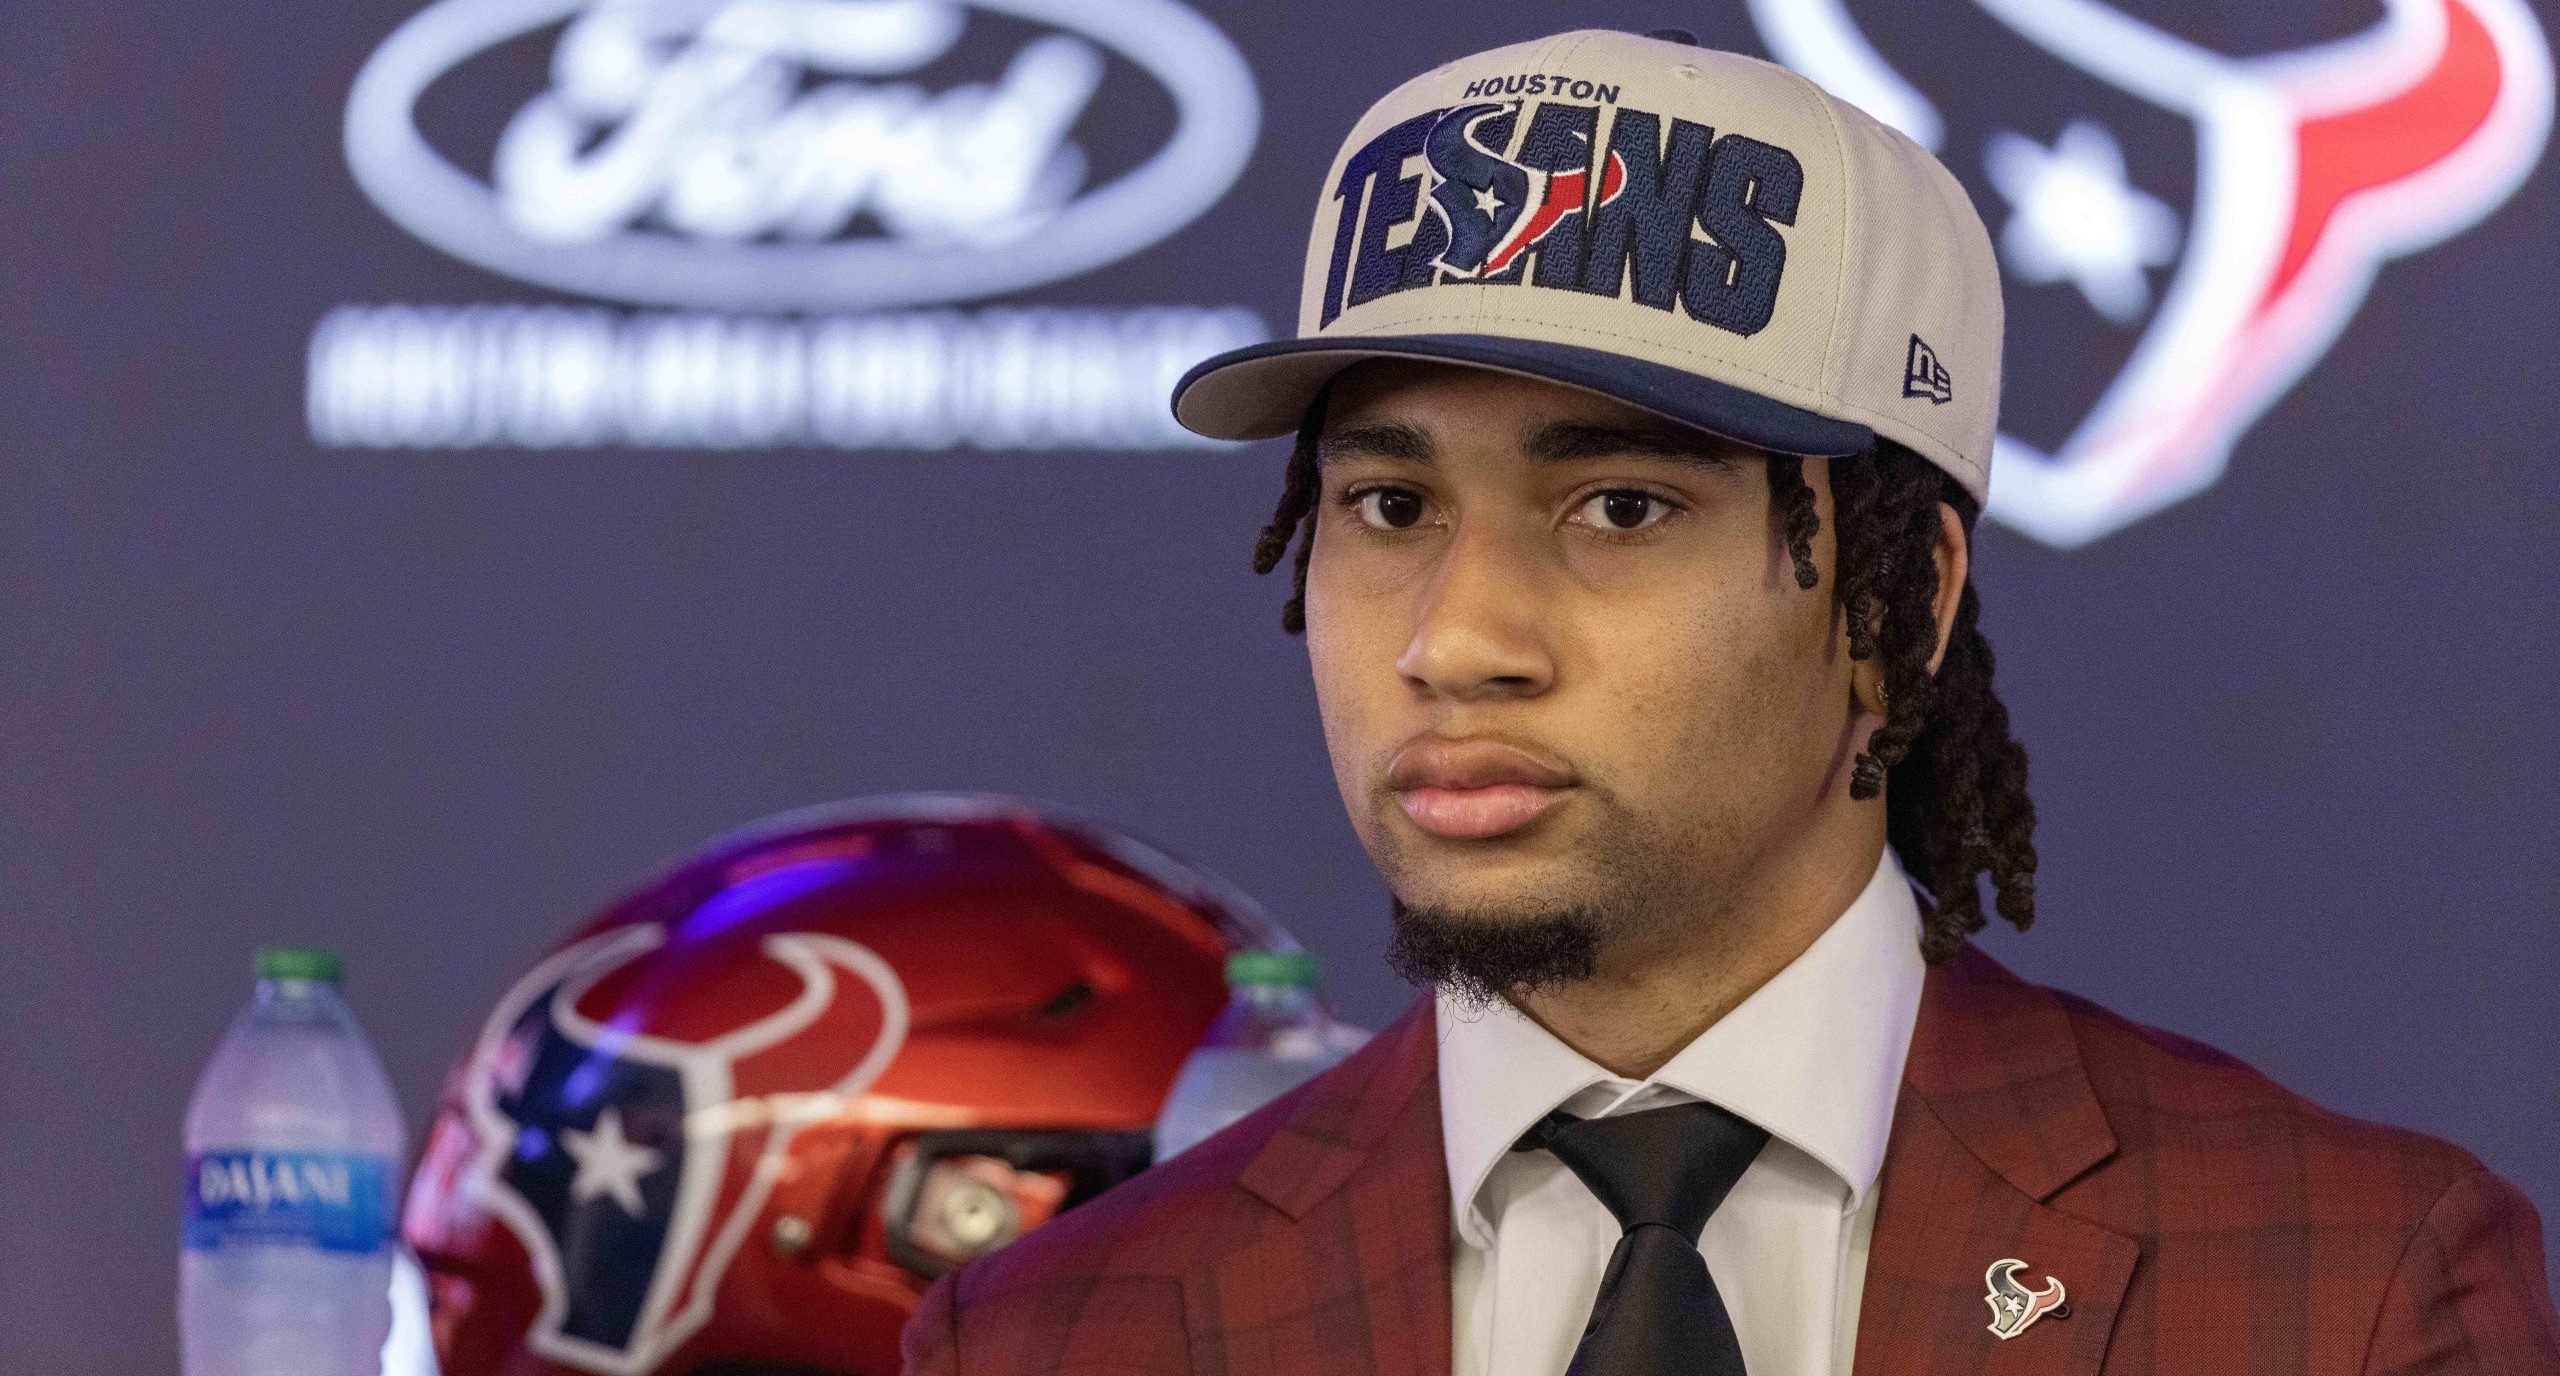 Apr 28, 2023; Houston, TX, USA; Houston Texans quarterback CJ Stroud, second overall pick in the 2023 NFL Draft, listens to a question at a press conference at NRG Stadium. Mandatory Credit: Thomas Shea-USA TODAY Sports